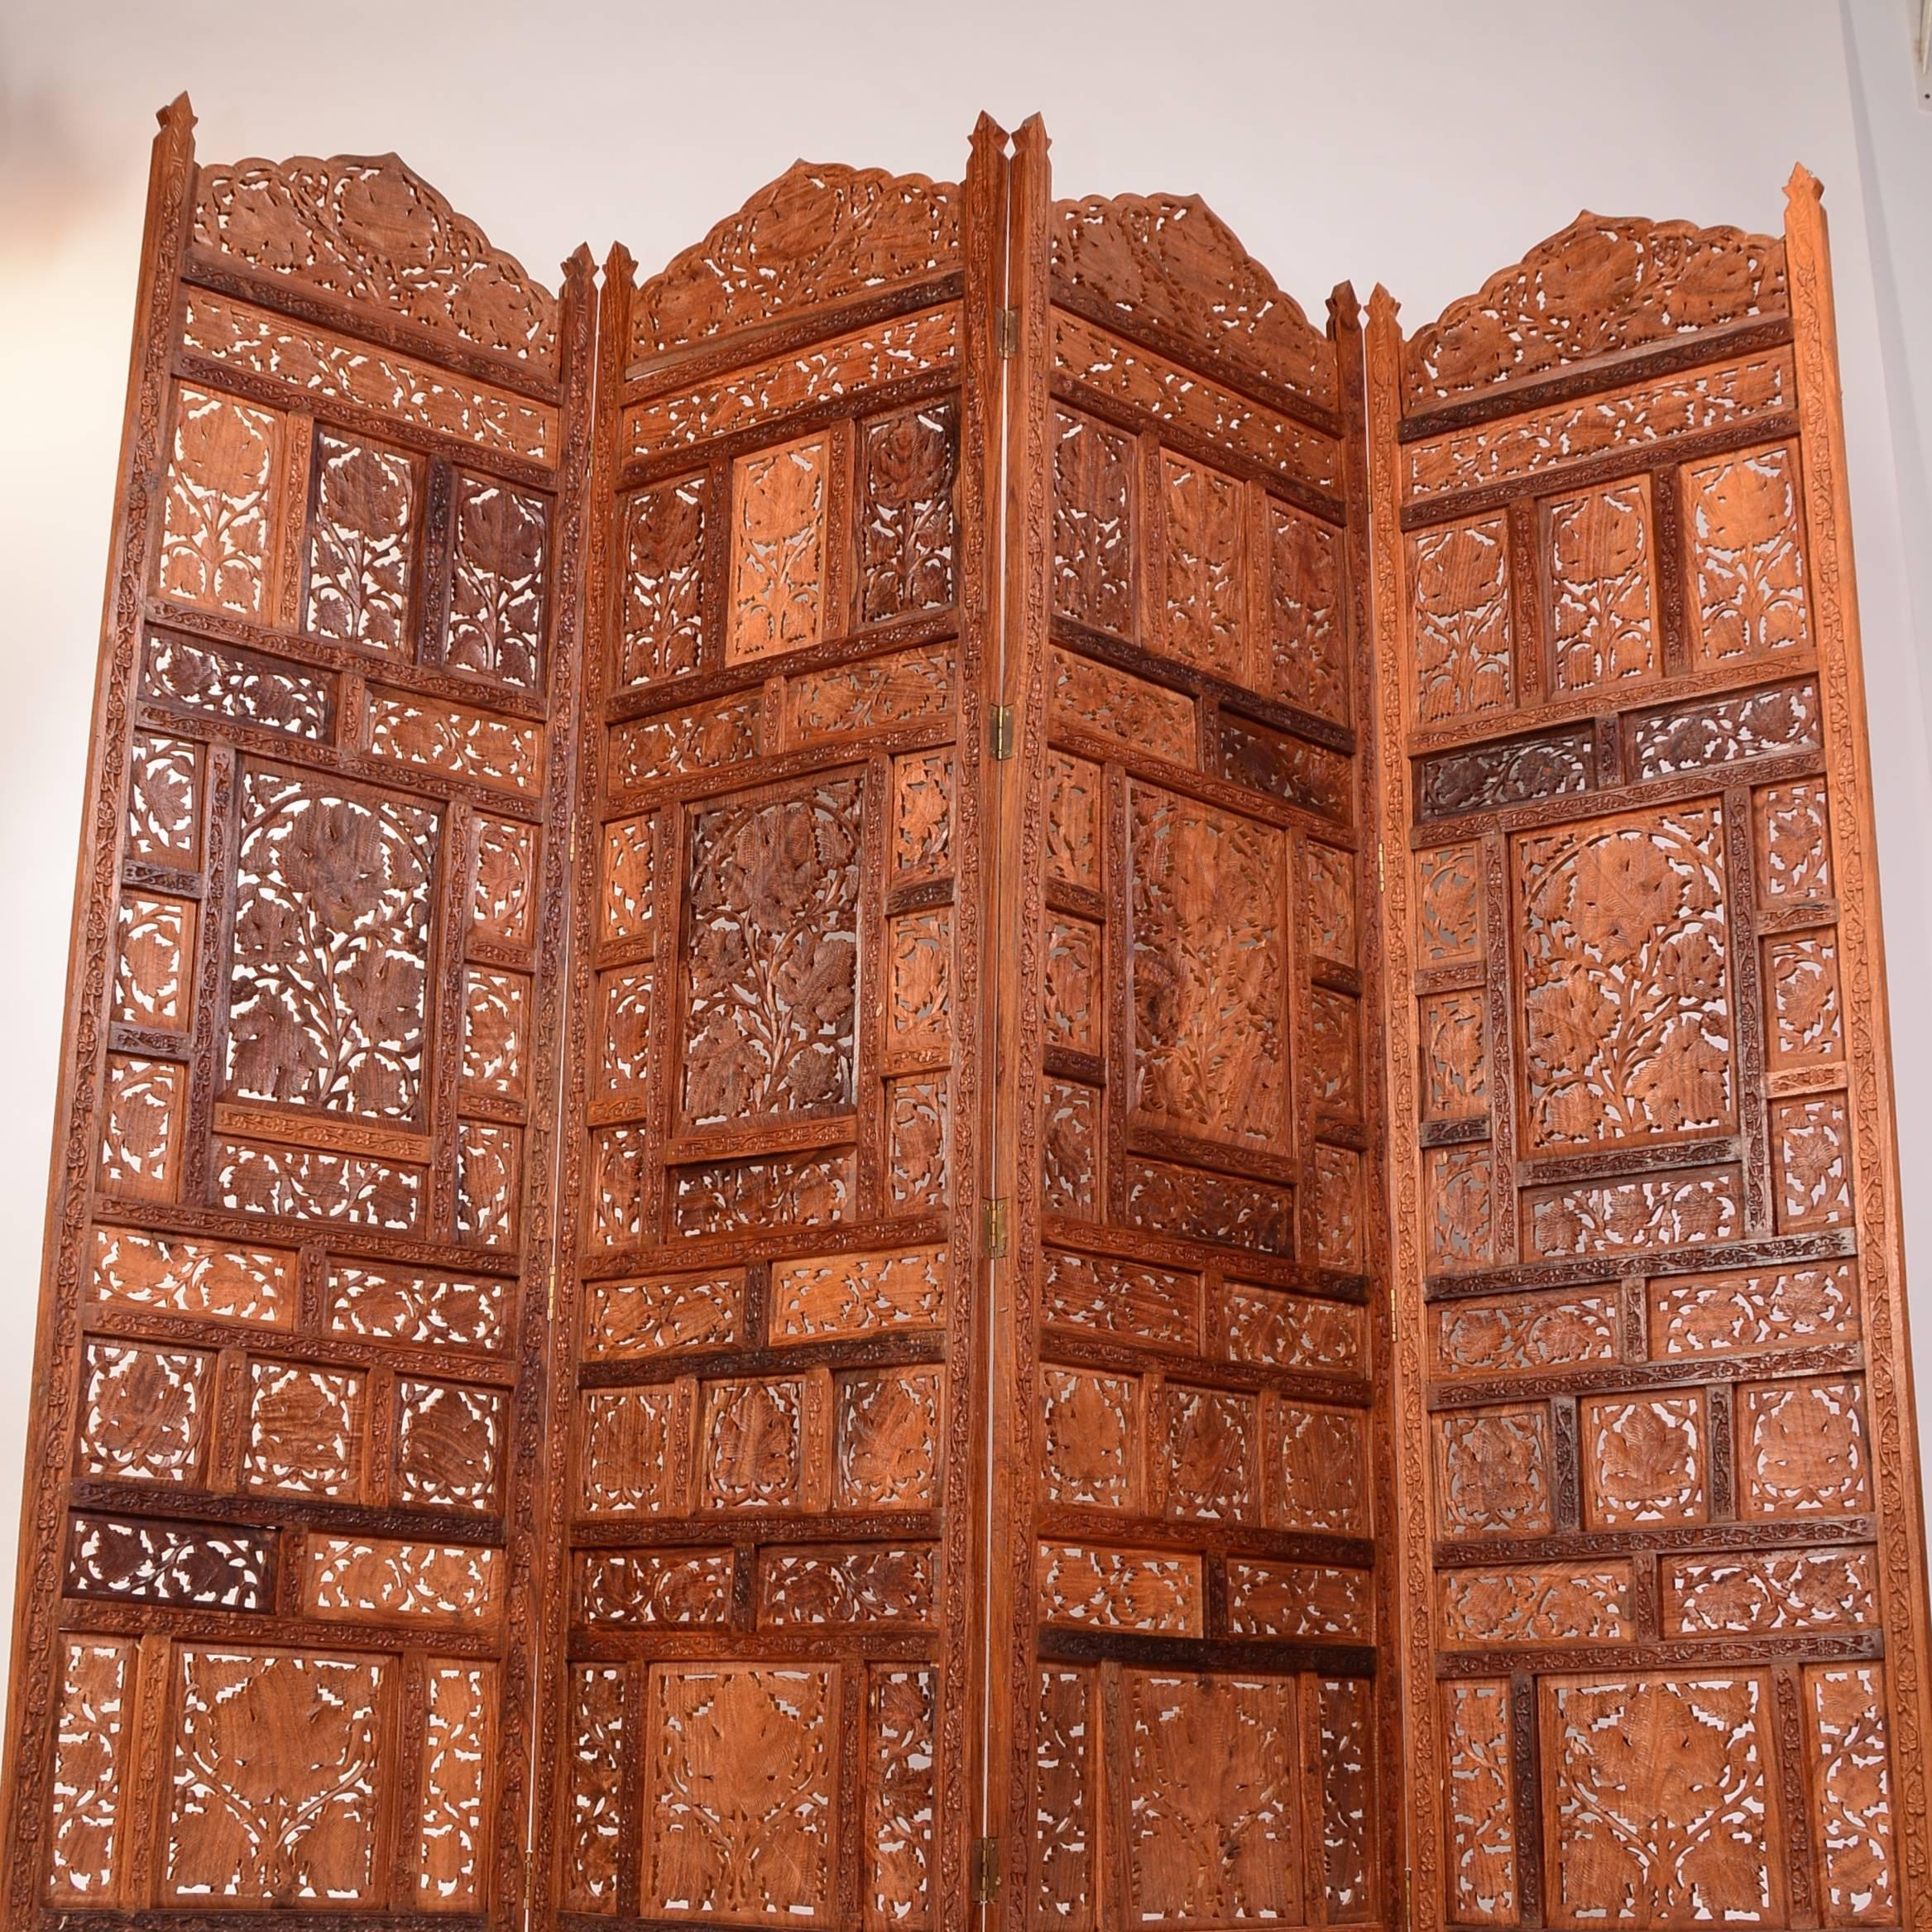 We have four of these beautifully preserved Anglo Indian elaborately carved four panel screens in stock. circa late 1800s, these heavy teak folding screens feature elaborate open work carved panels with leaf motif. The listed price is for one 4